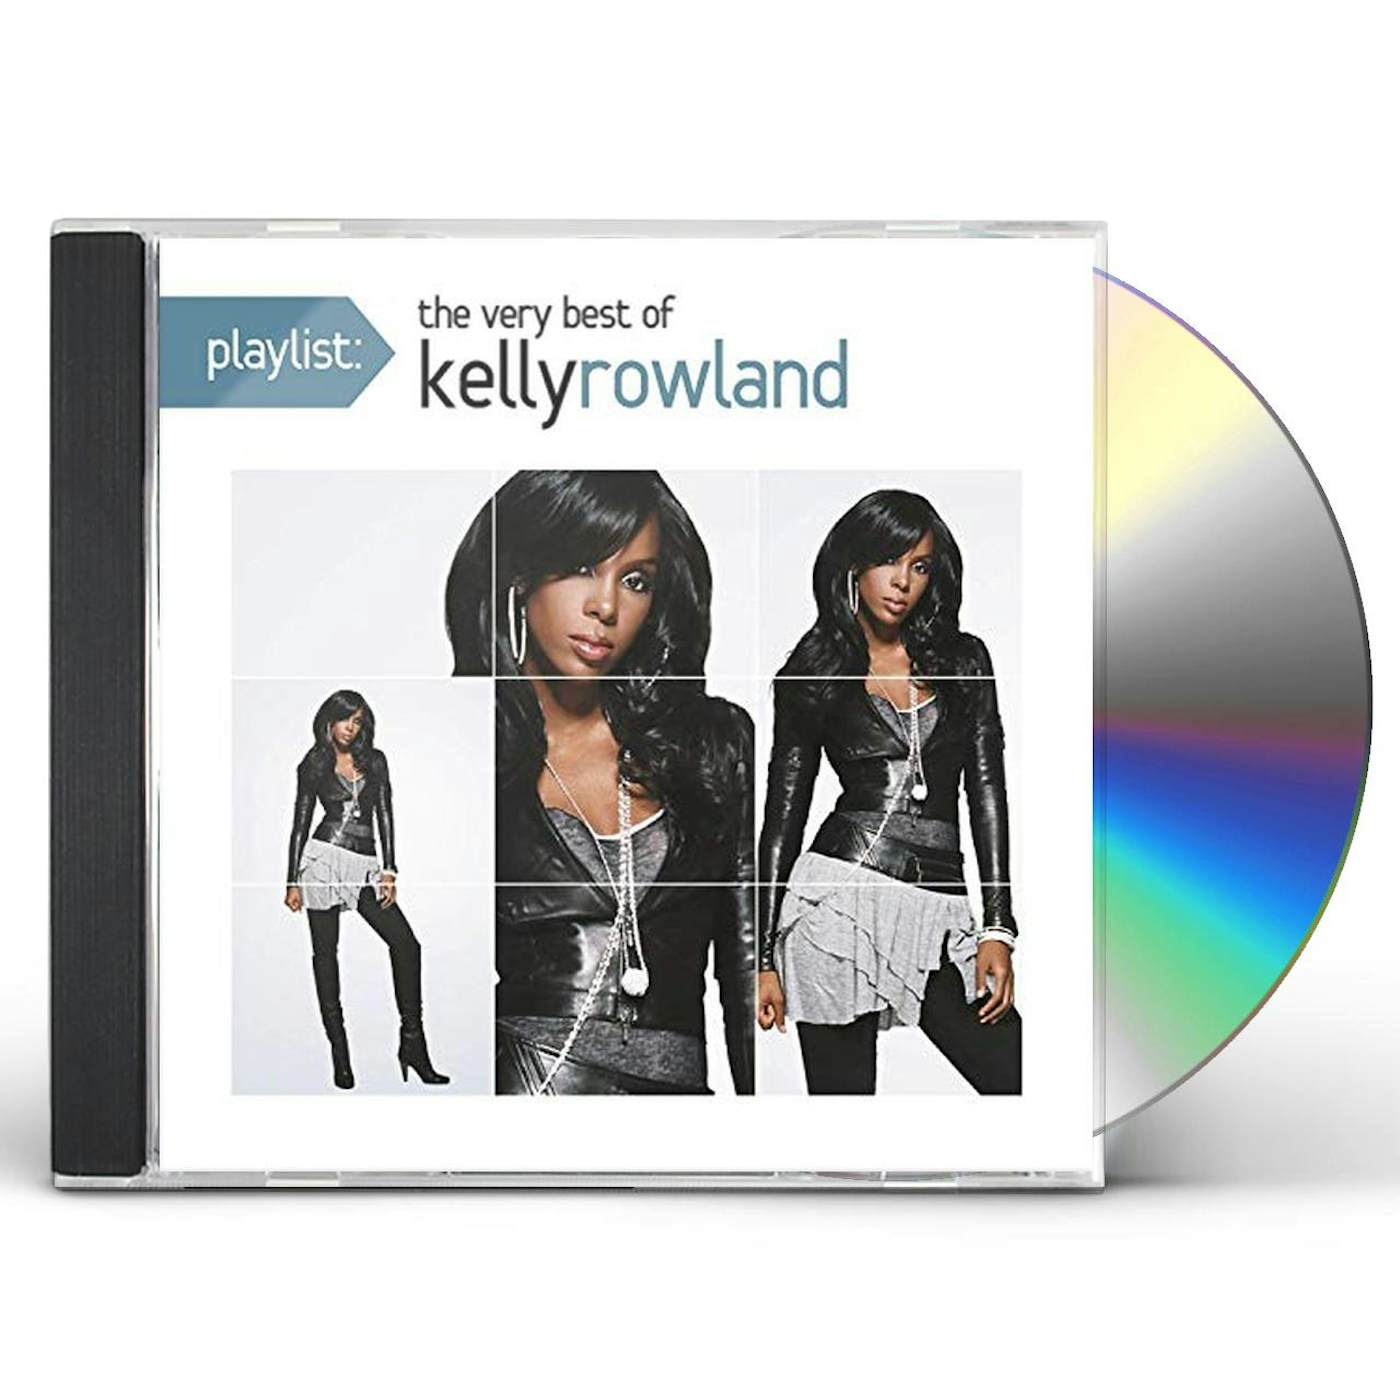 PLAYLIST: THE VERY BEST OF KELLY ROWLAND CD